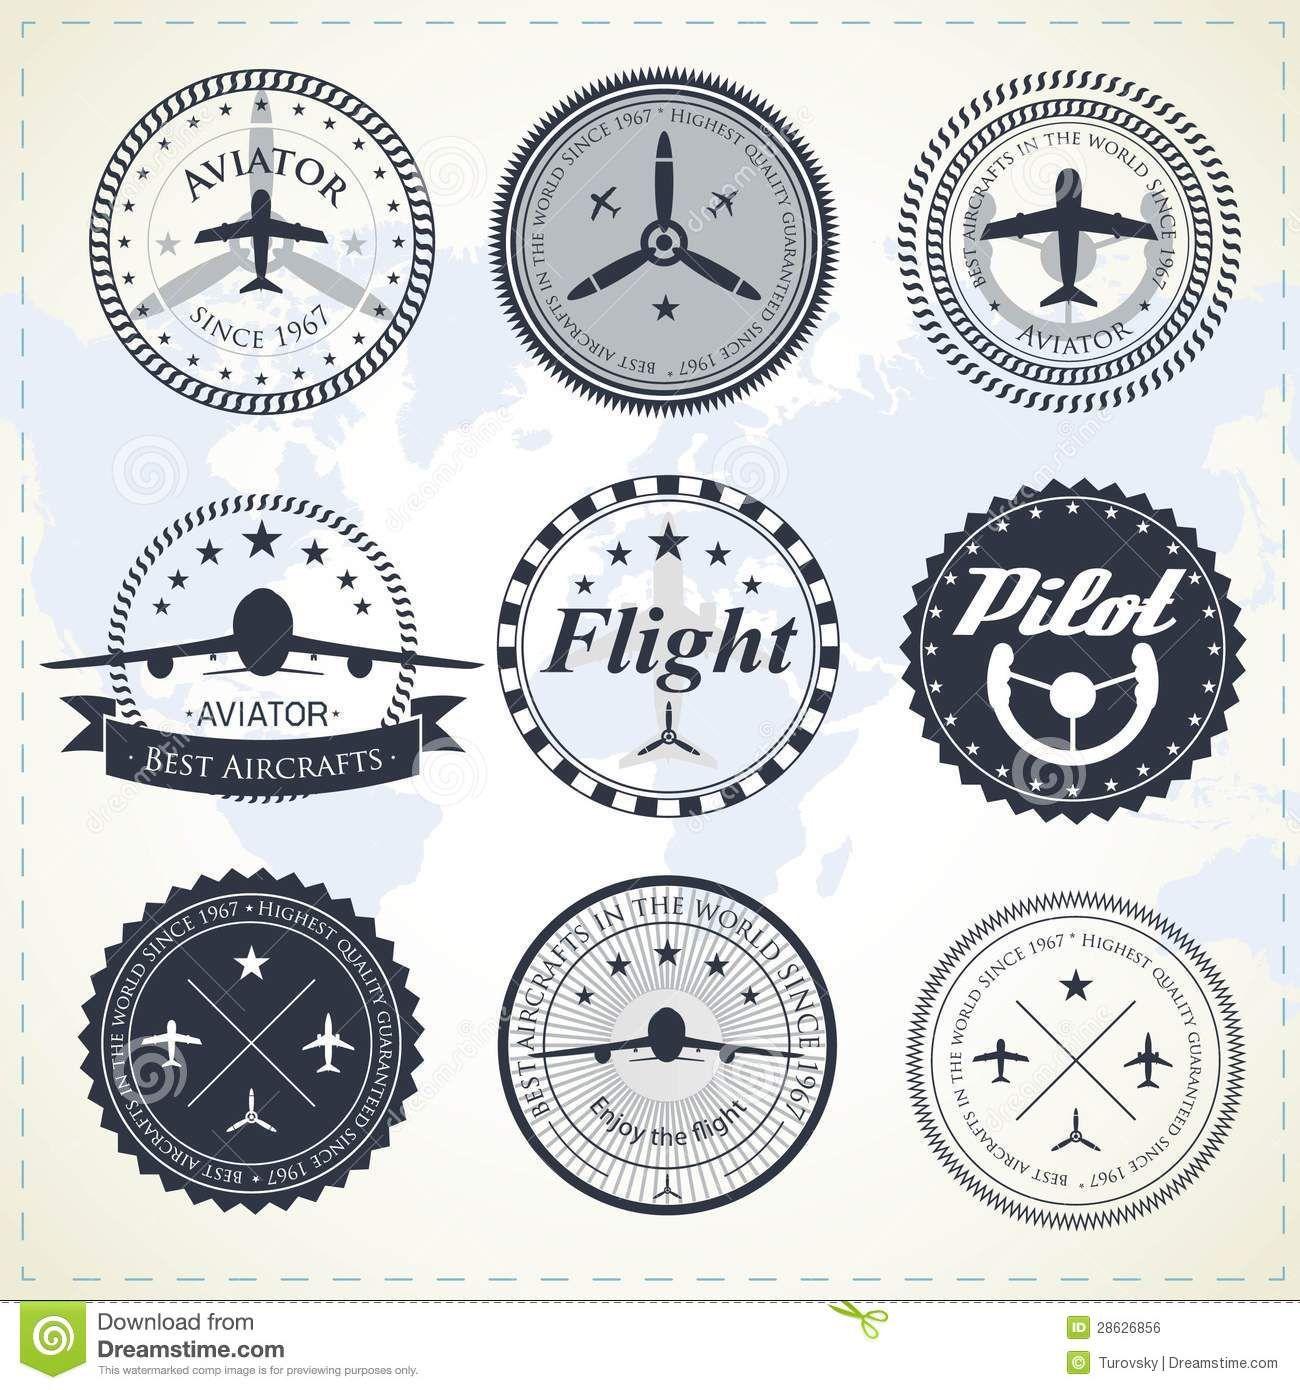 Best Known for Its Airplanes Logo - vintage aviation logos - Google Search … | Aviation | Aviat…